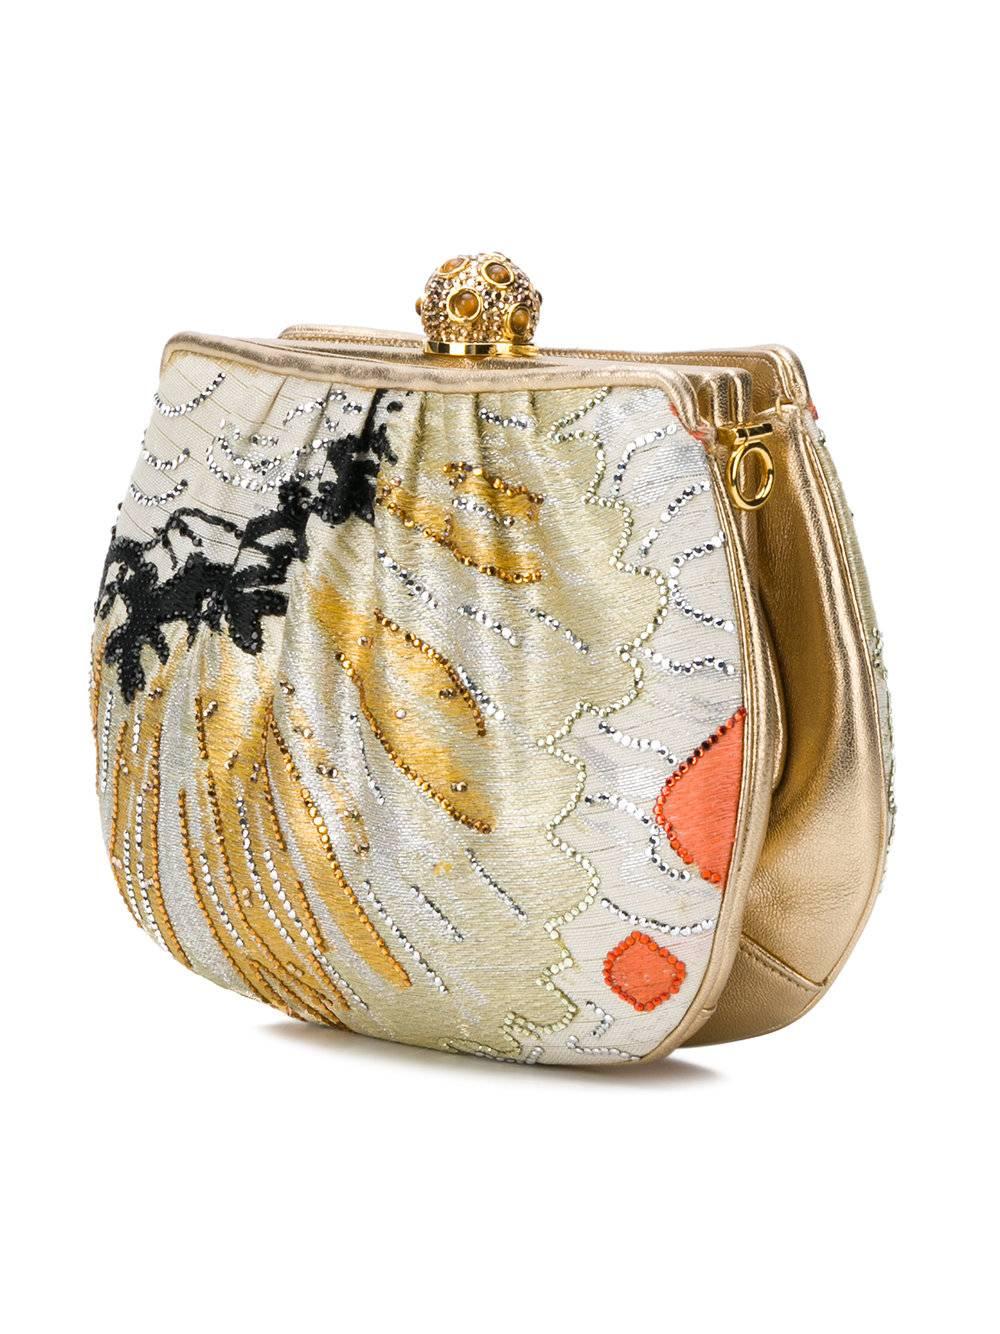 The iconic Judith Leiber imparts her extraordinary, glittering sensibility to this design. Made so desirable in its luxuriant textures of satin, gold leather and Austrian crystal strass, the box-shaped clutch is patterned in painterly strokes, and